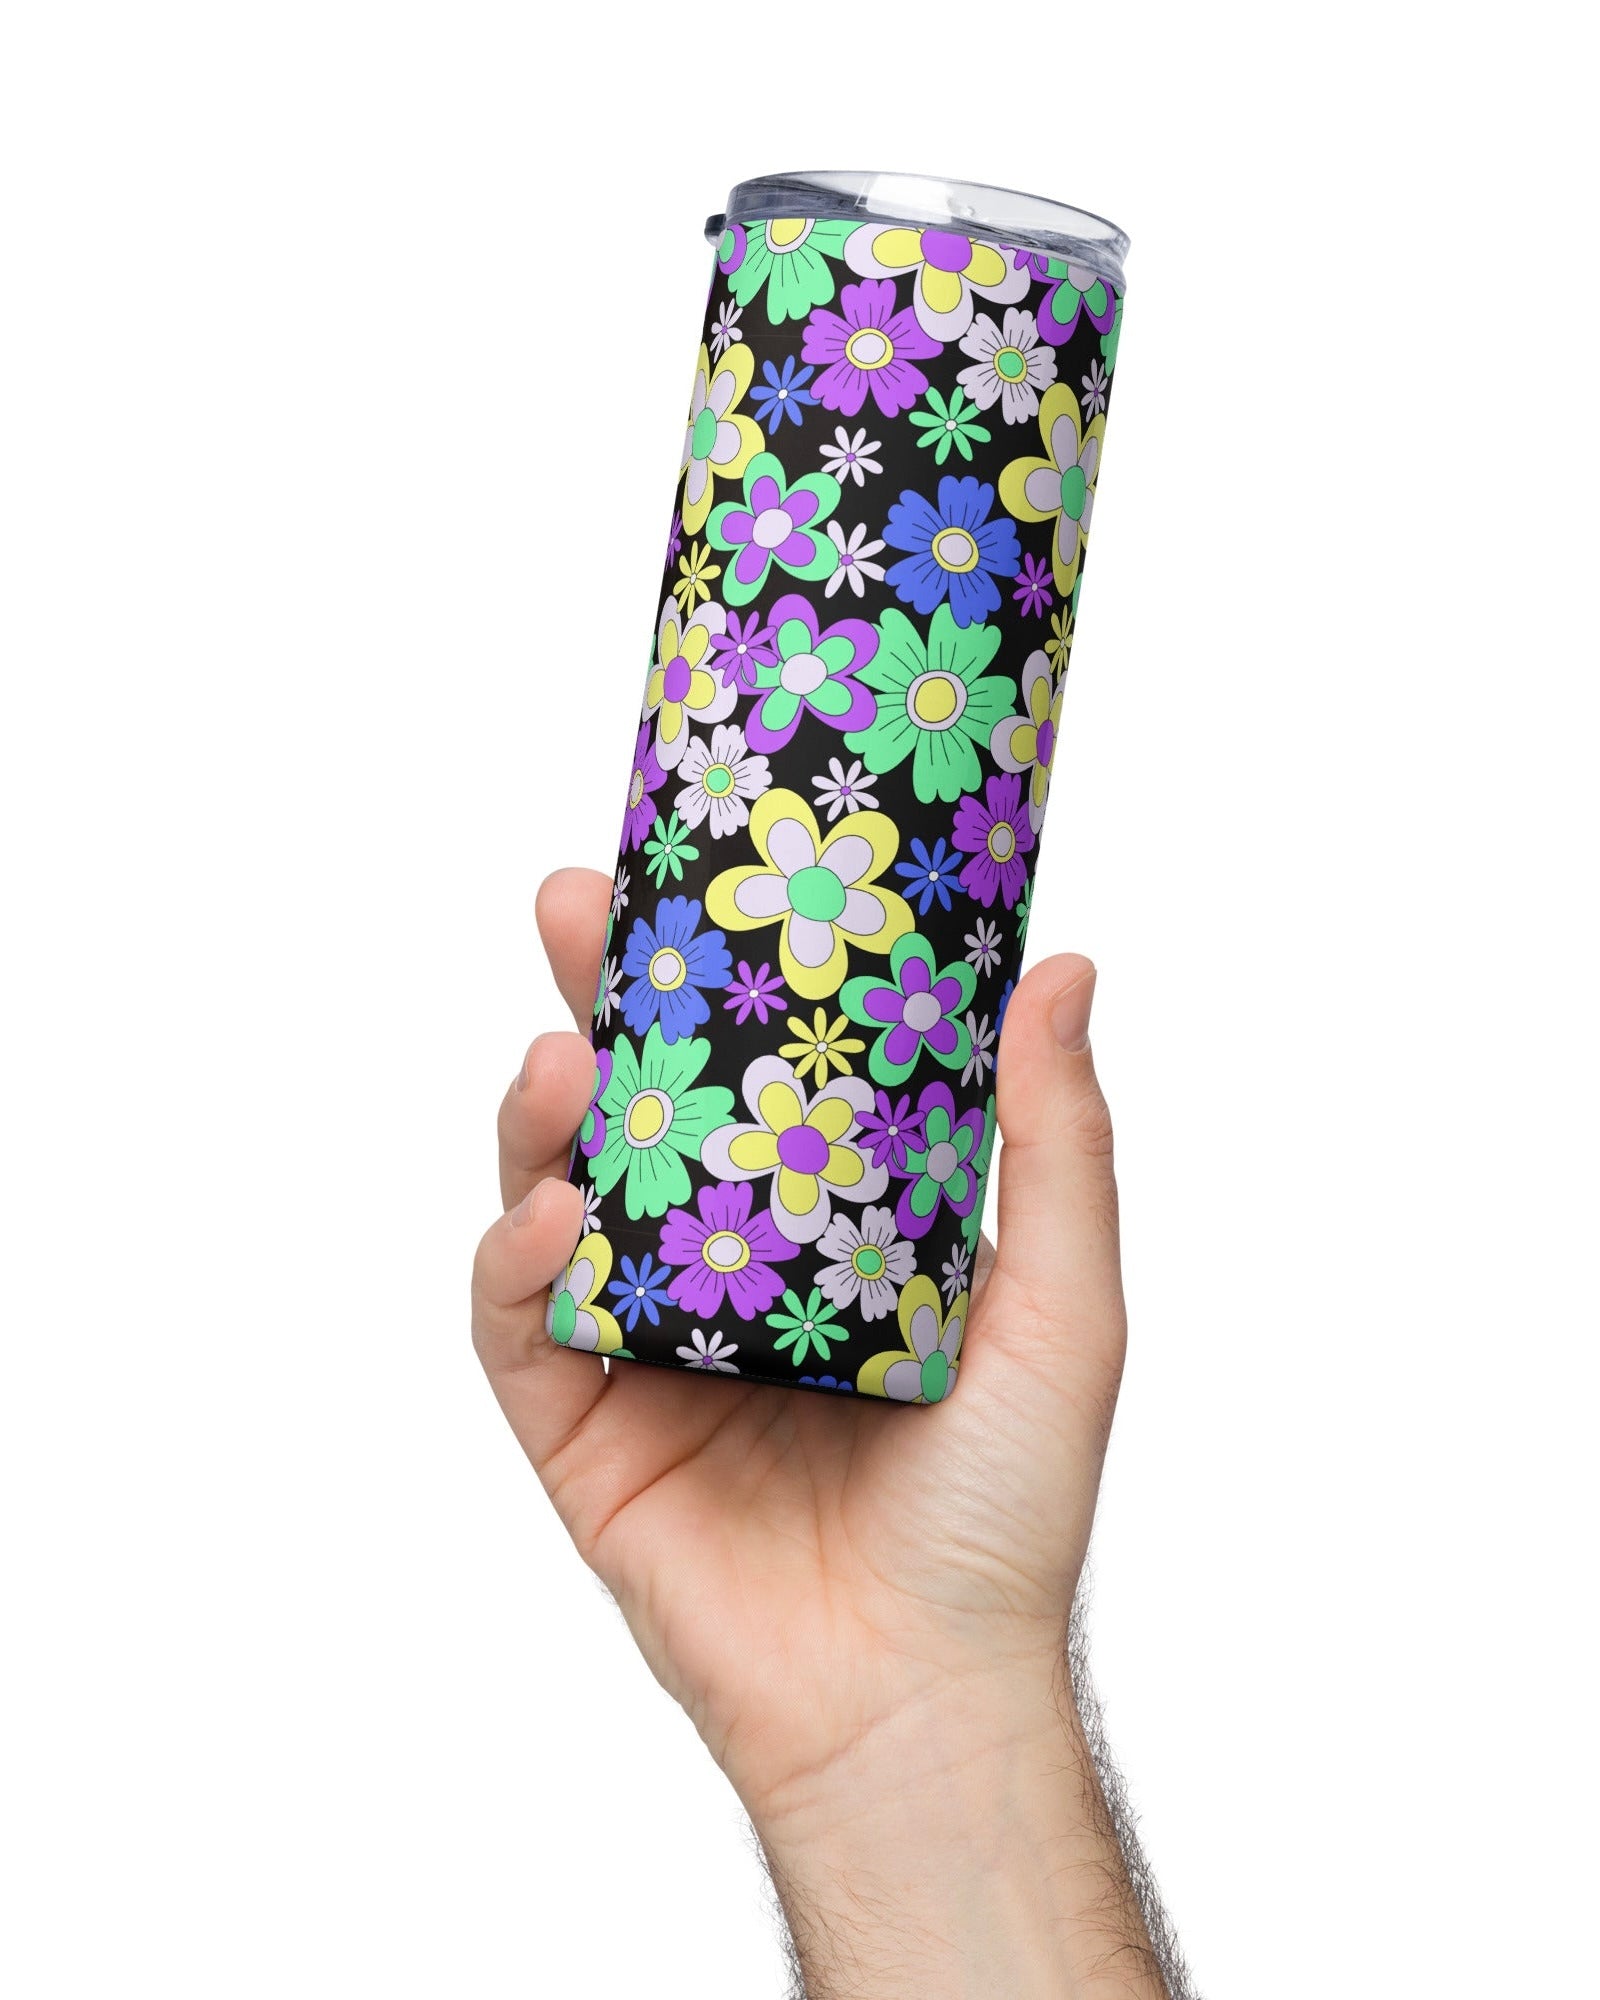 Crazy Daisy Stainless Steel Tumbler